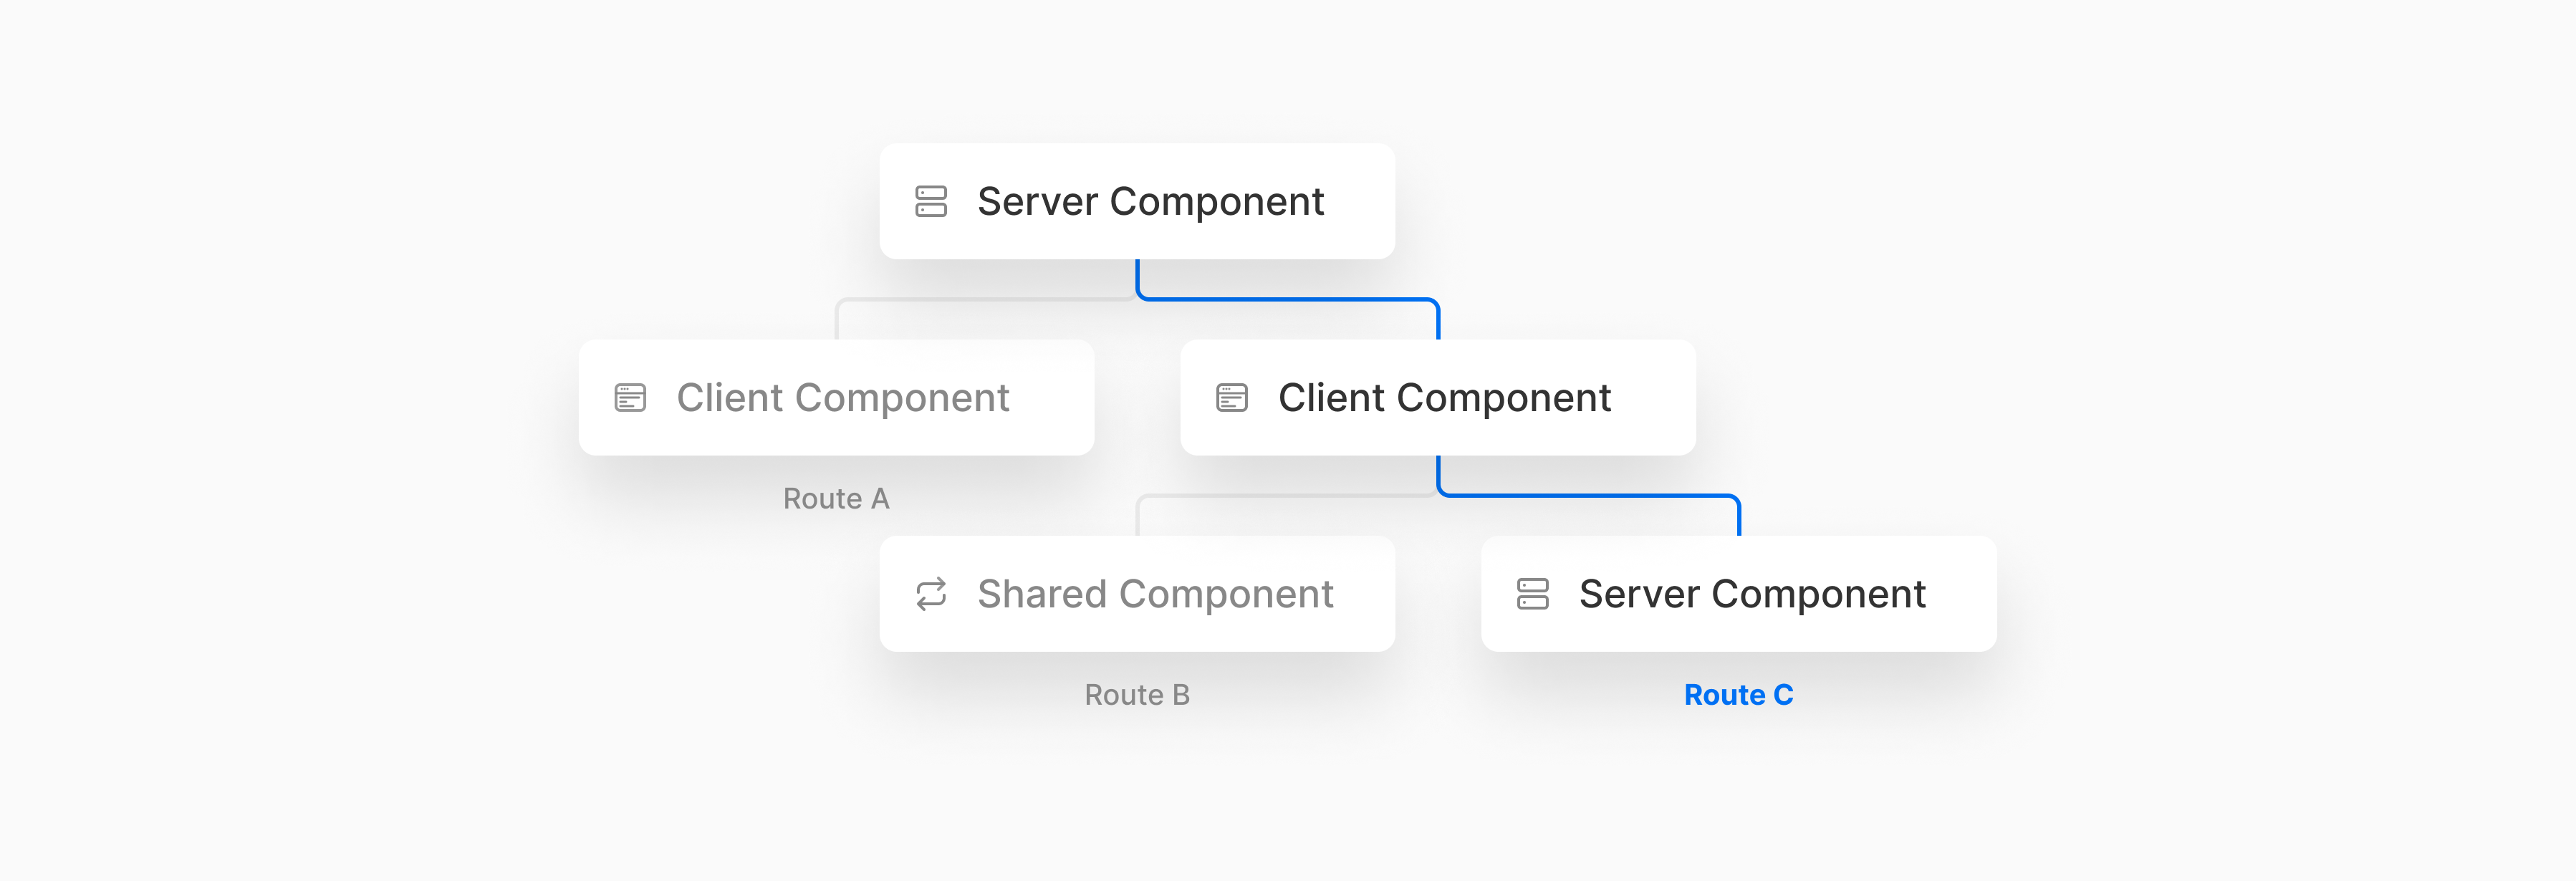 Both client and server components can be used together in the same route.